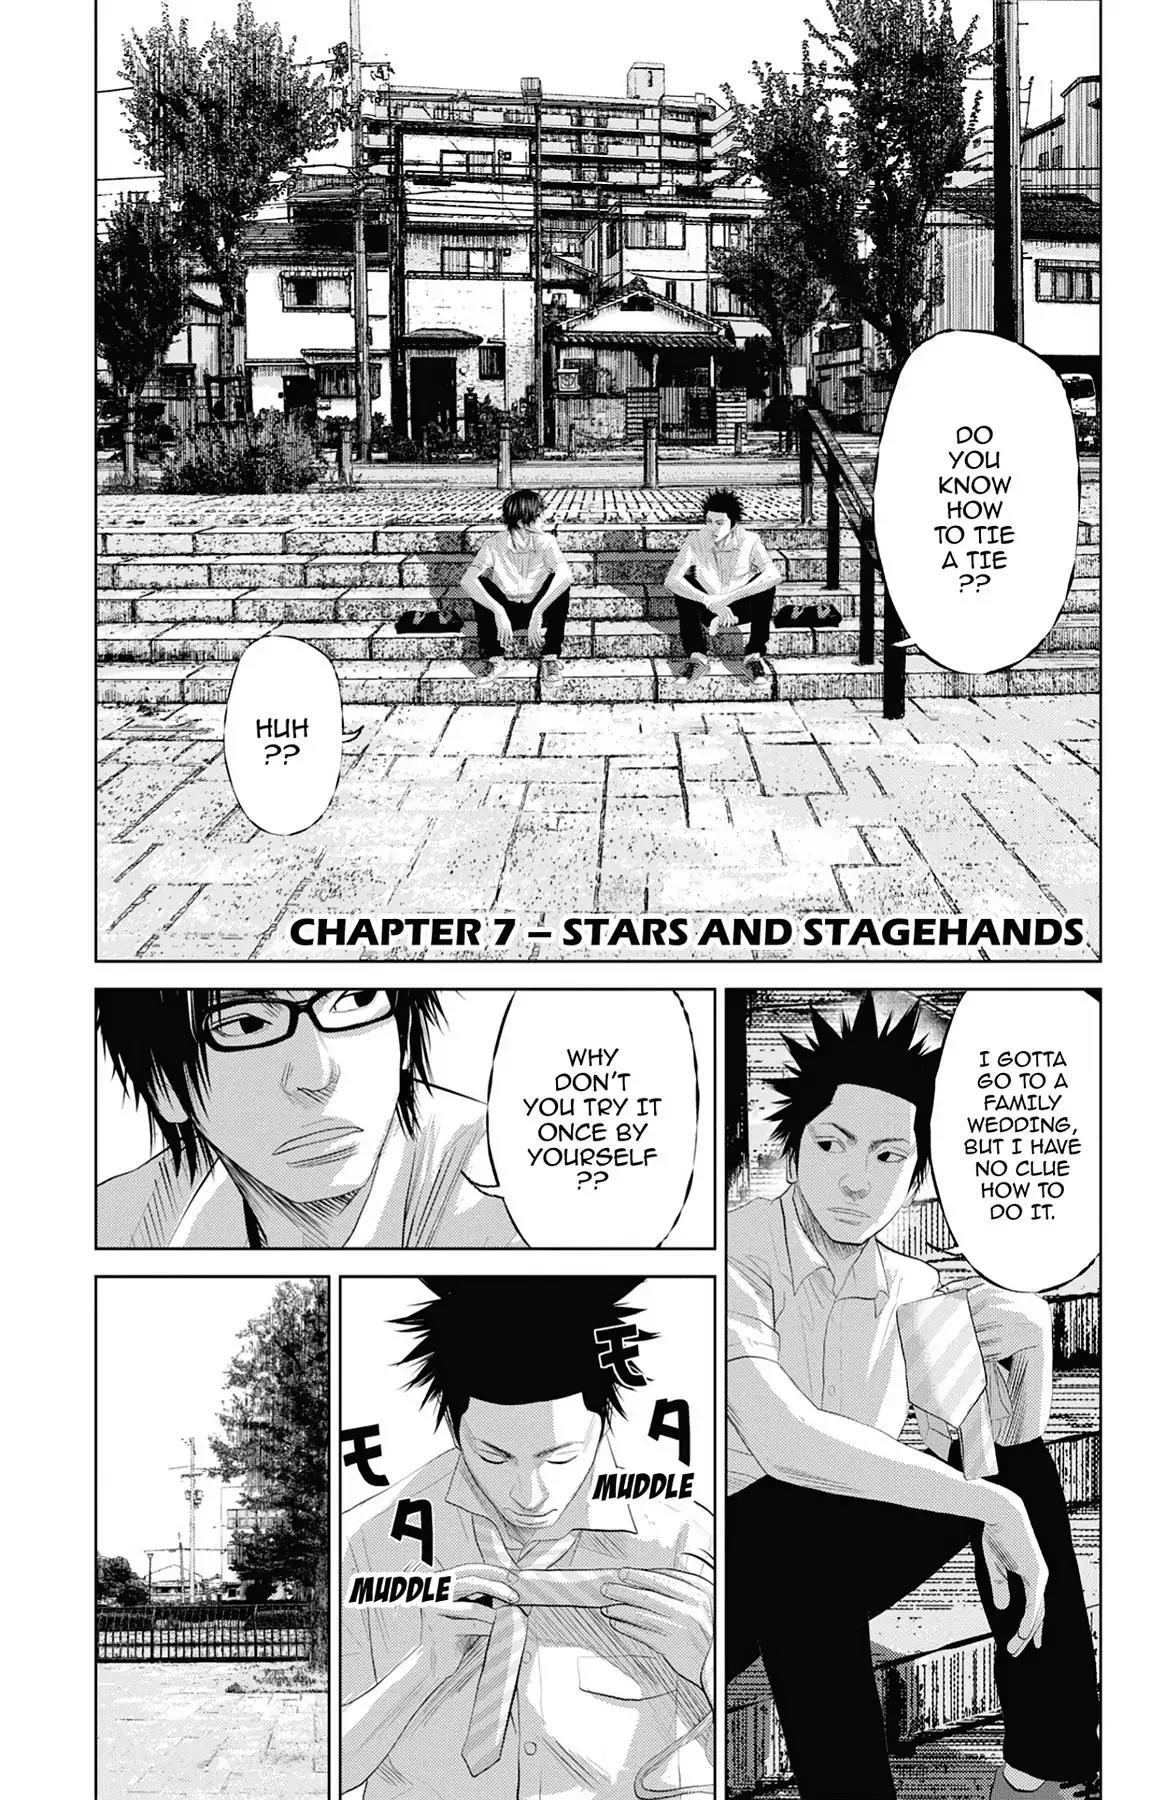 Setoutsumi Vol.1 CHAPTER 7 - STARS AND STAGEHANDS